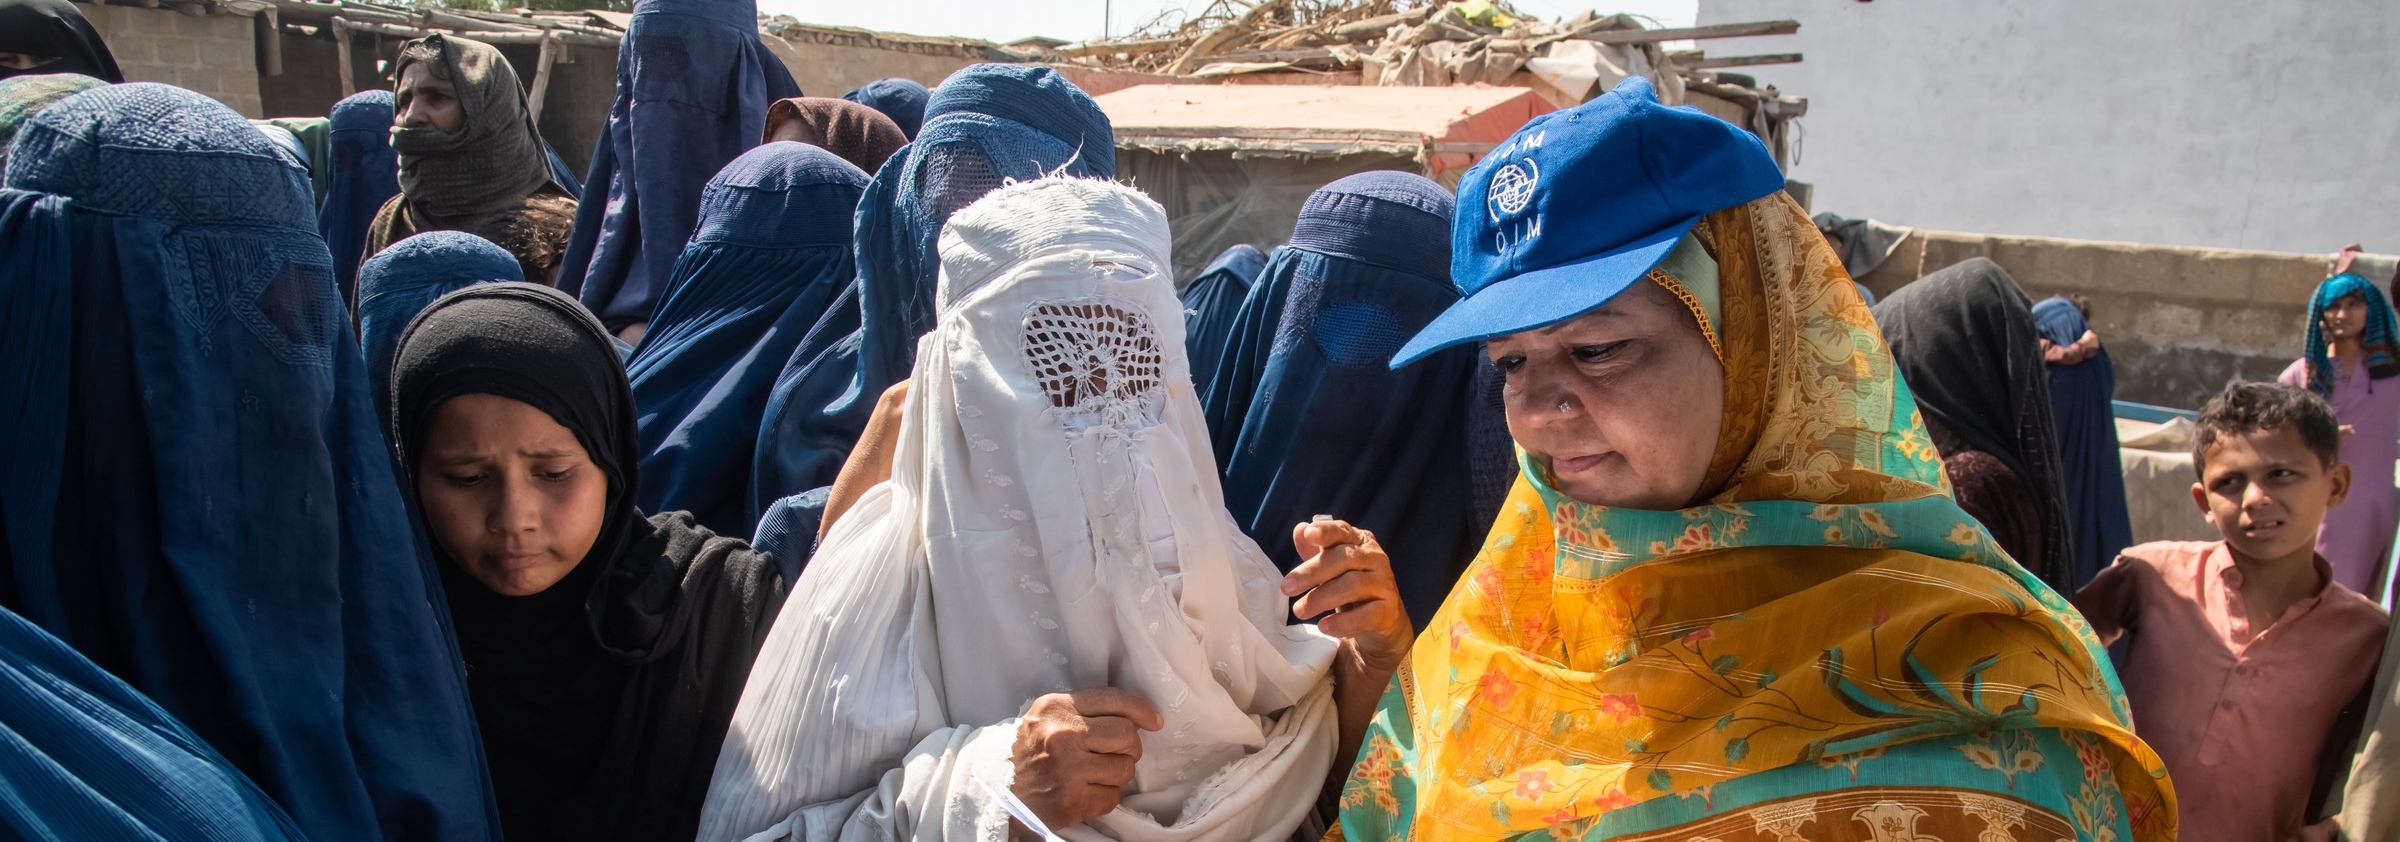 Distribution of multipurpose cash assistance in Karachi to Afghan nationals in need of humanitarian assistance. © IOM Pakistan 2022.